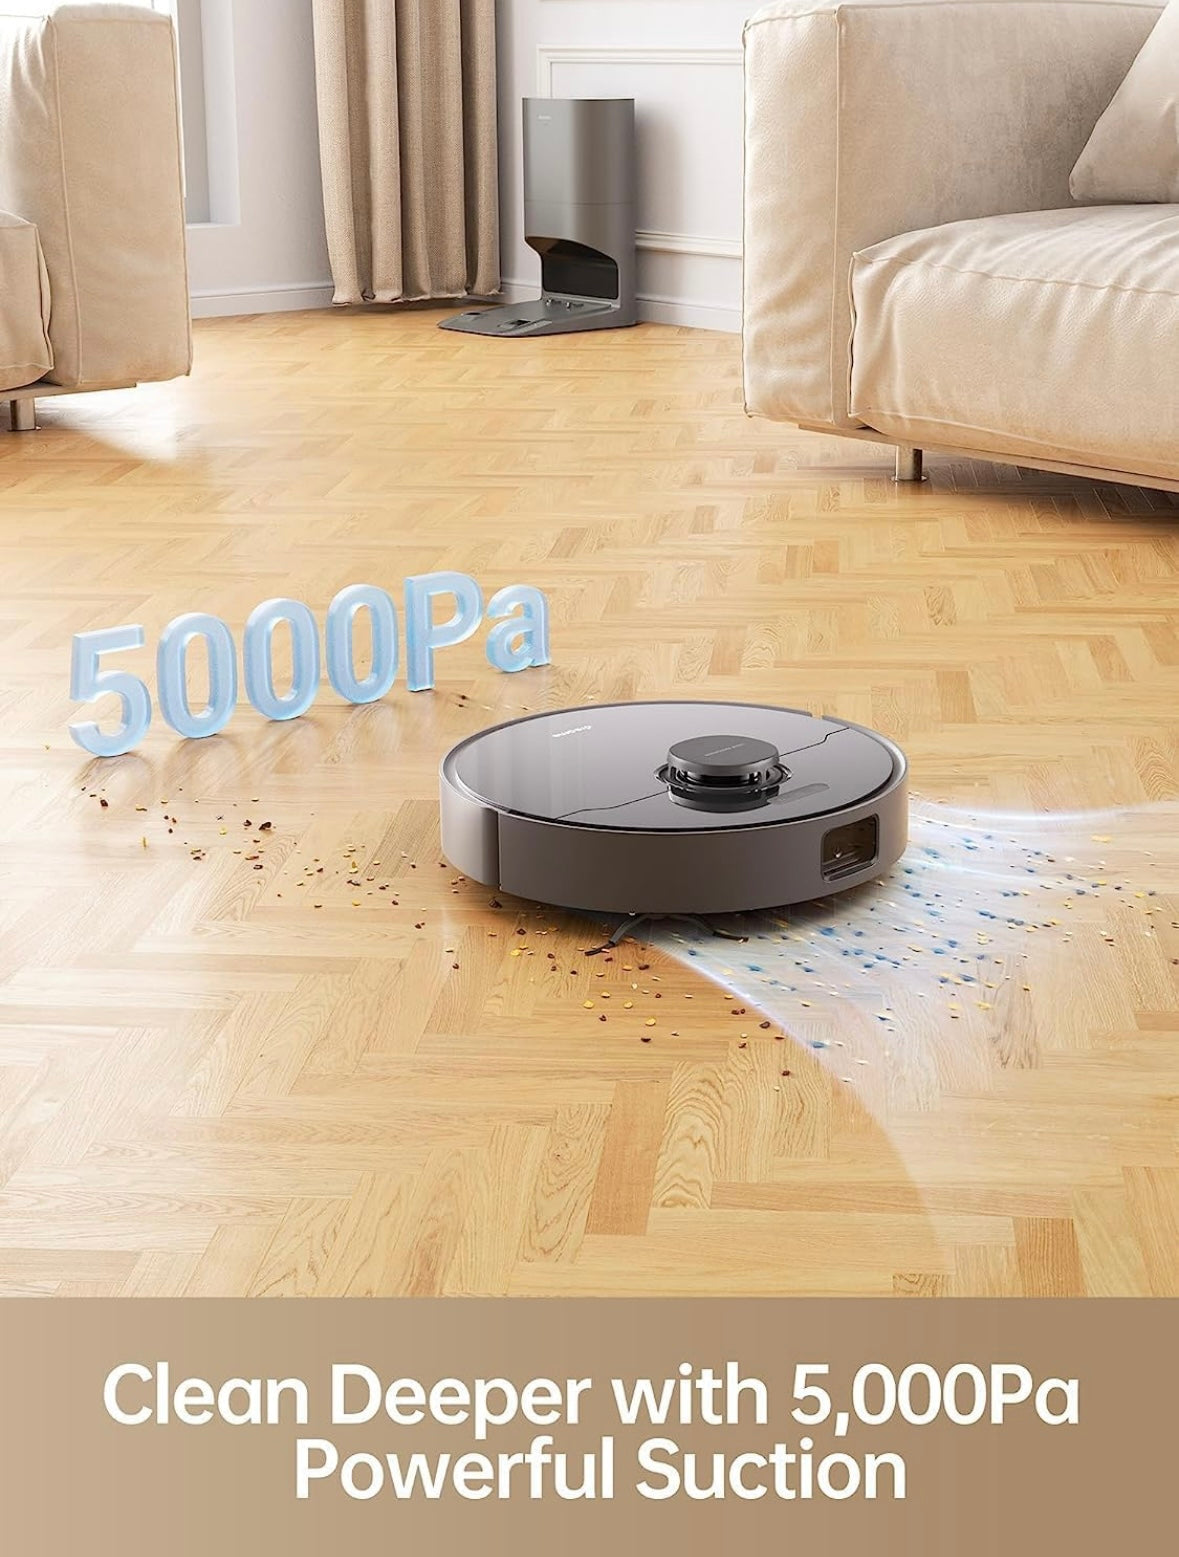 dreame D10s Plus Robot Vacuum Mop Combo Self-Emptying for up to 65 Days